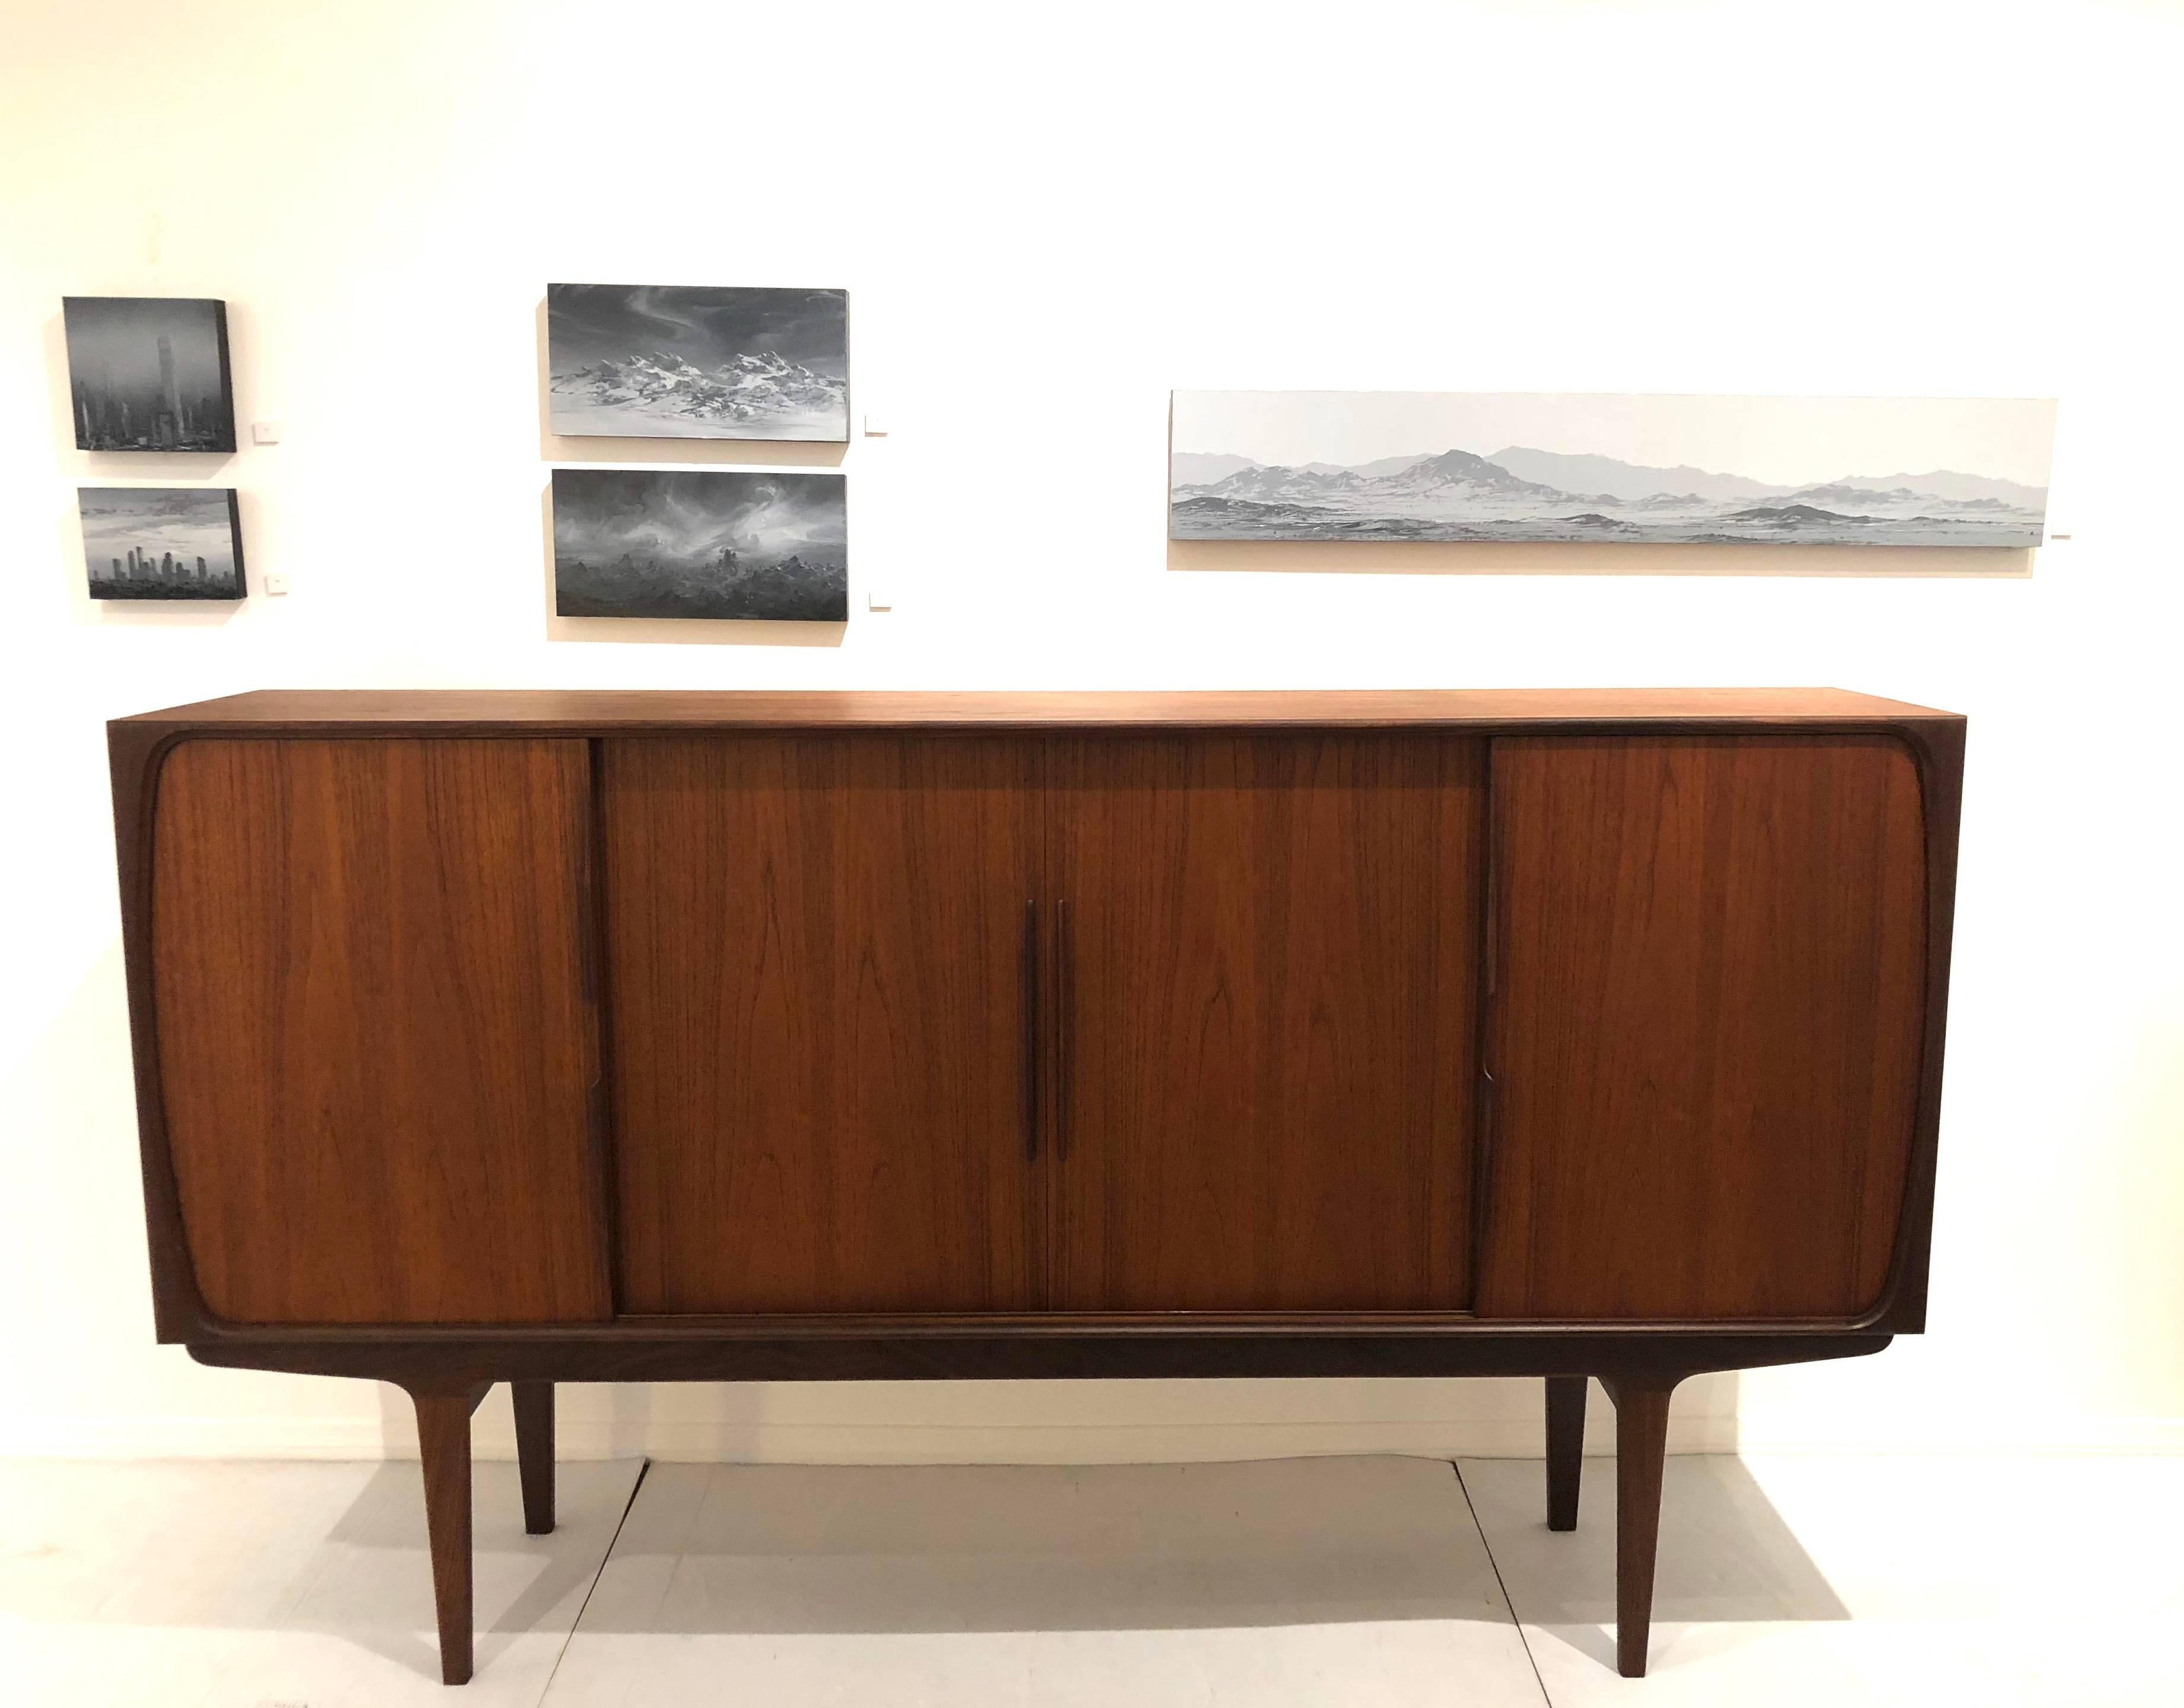 Beautiful large and impressive teak credenza with zebra wood interior, and mirror back with detail, circa 1950s freshly restored in great condition, tons of storage, one of a kind piece beautiful handles and grain on the wood, sliding doors and